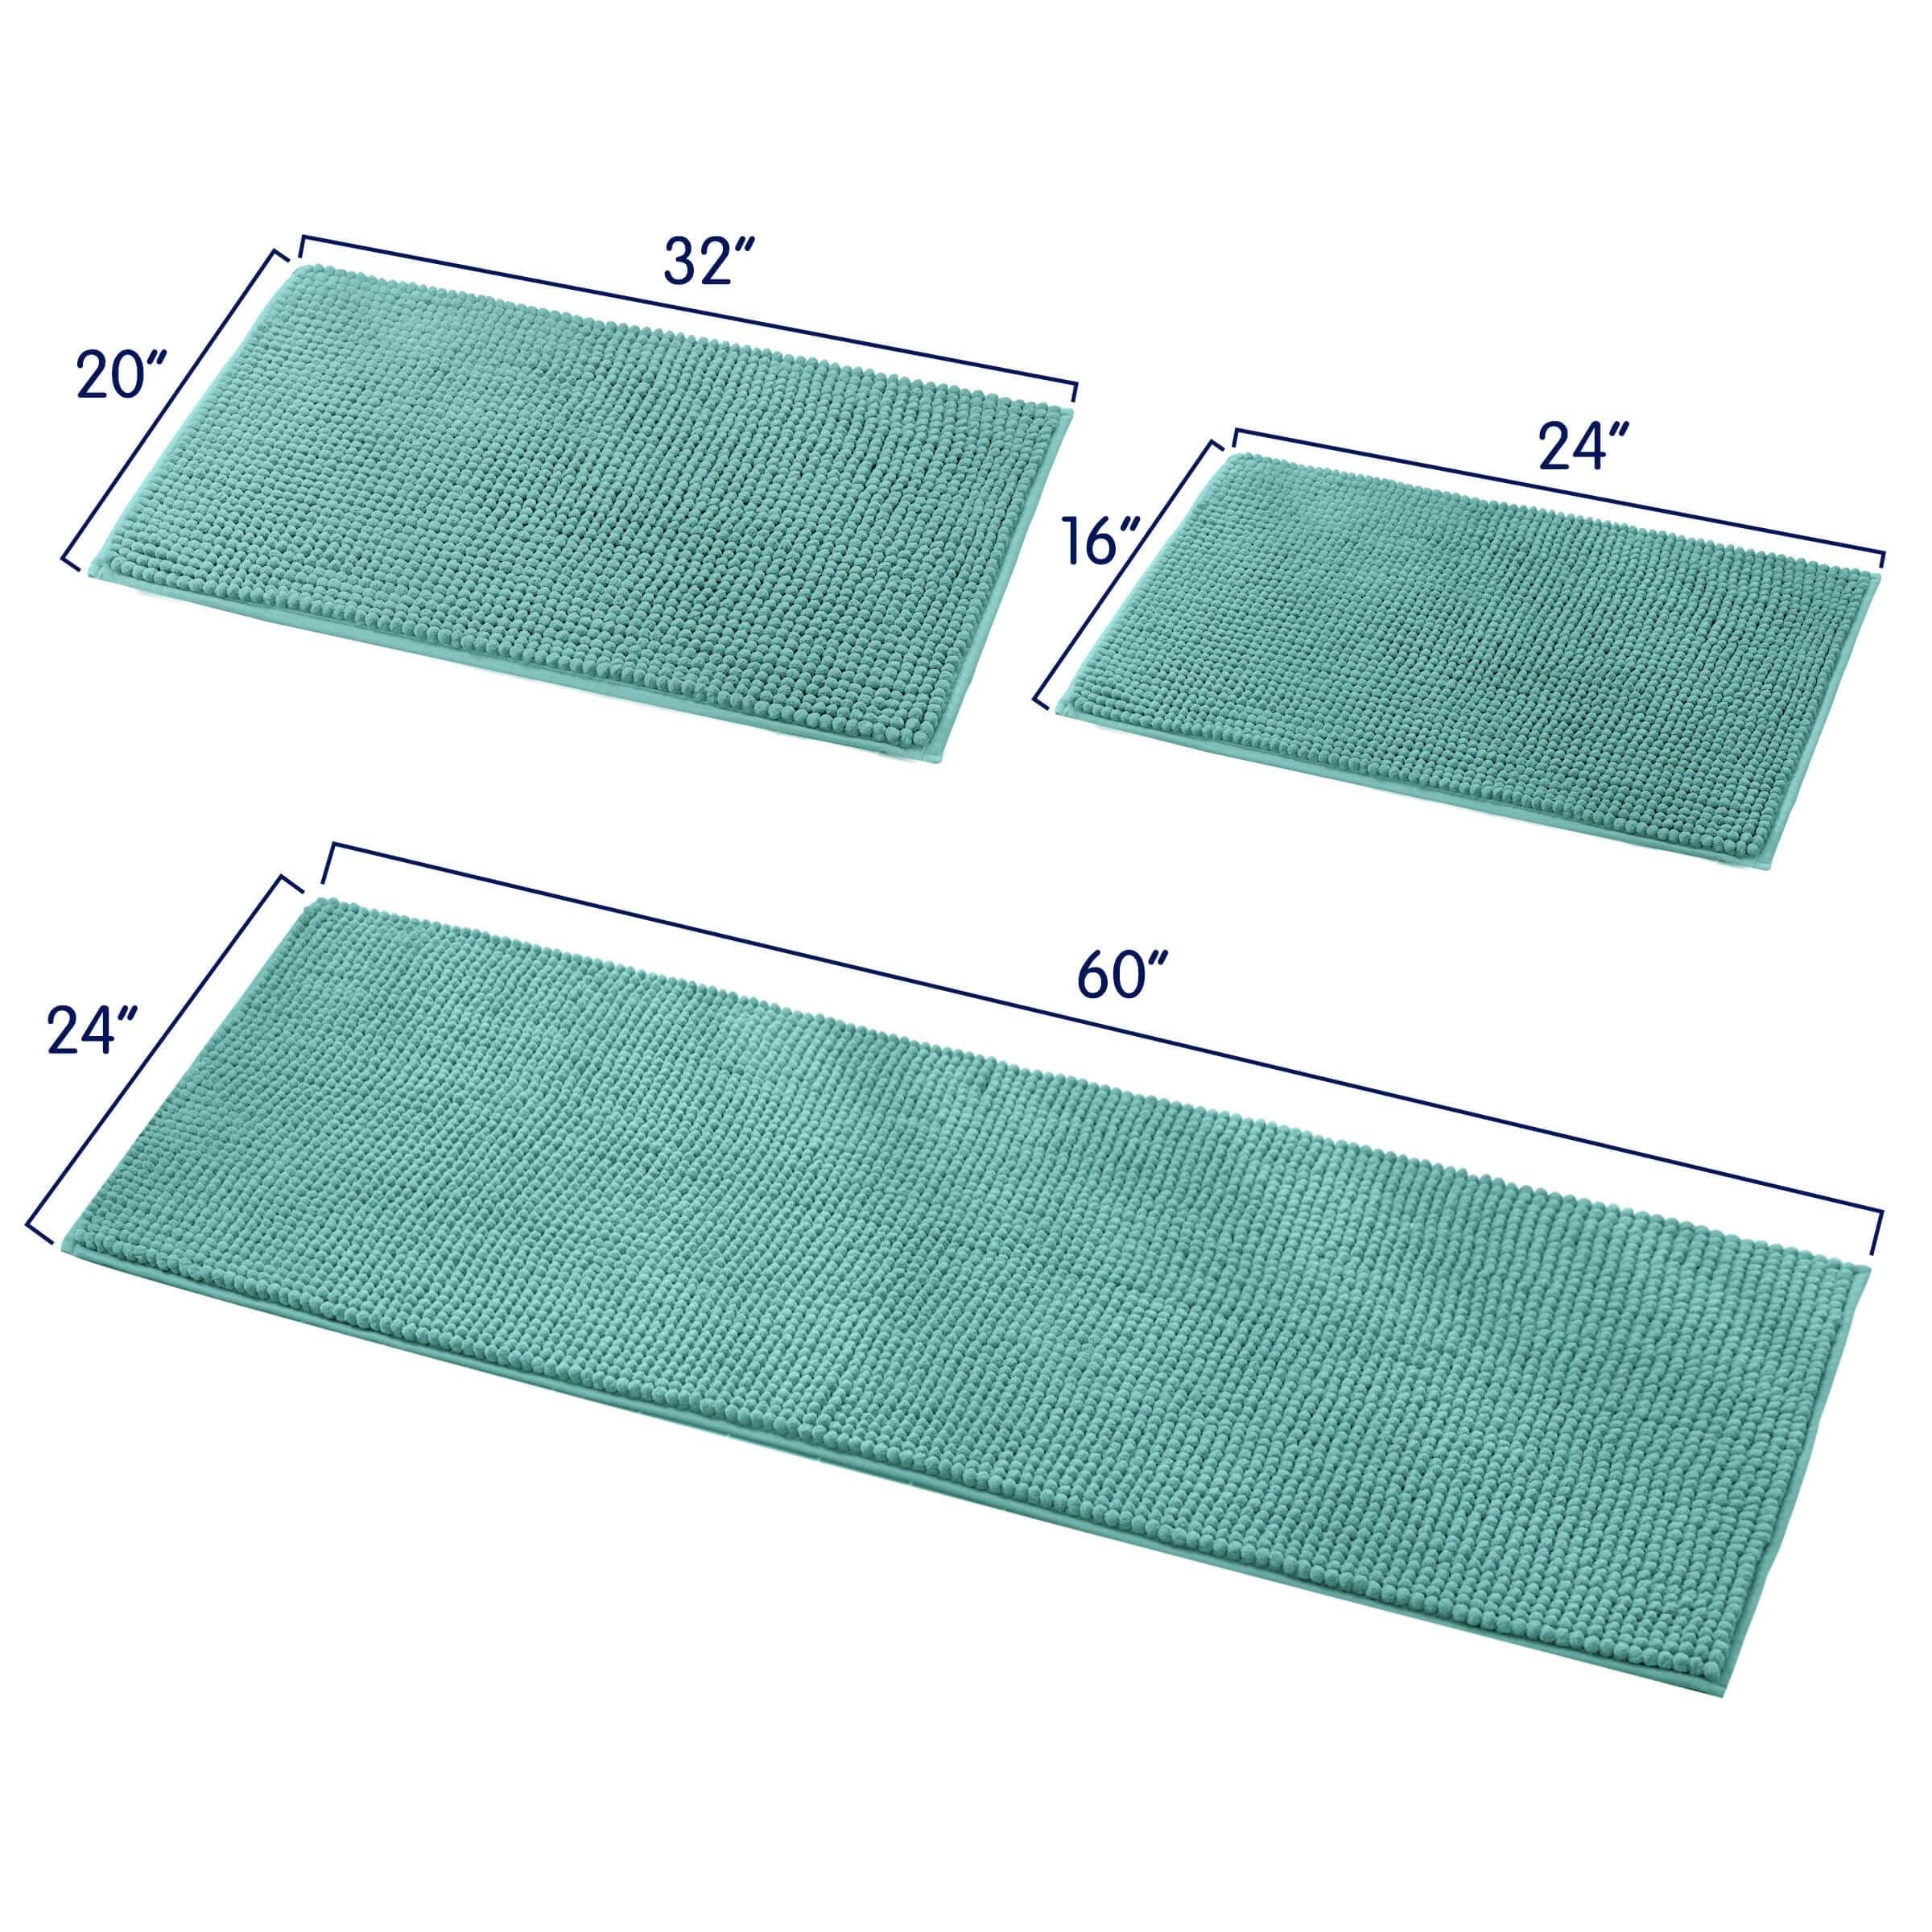 https://ak1.ostkcdn.com/images/products/is/images/direct/1af48ba413720dd0d35994876bab8a39770947f0/Subrtex-Chenille-Bathroom-Rugs-Soft-Super-Water-Absorbing-Shower-Mats.jpg